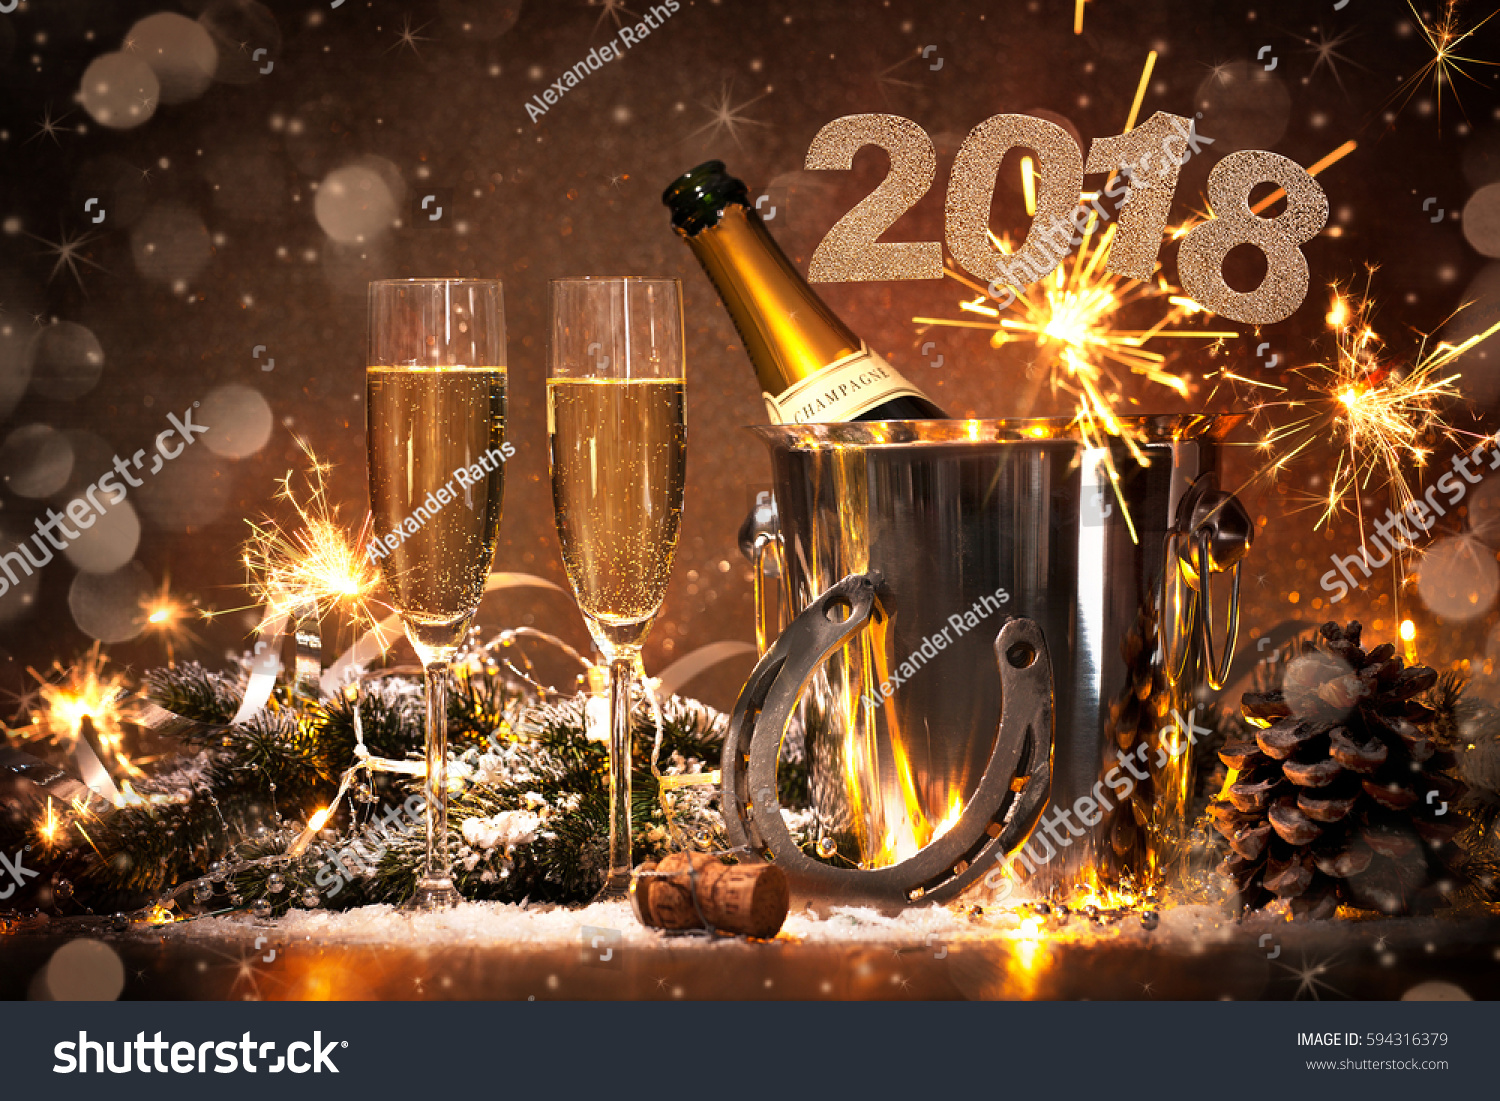 New Years Eve celebration background with pair of flutes and bottle of champagne in  bucket  and a horseshoe as lucky charm #594316379